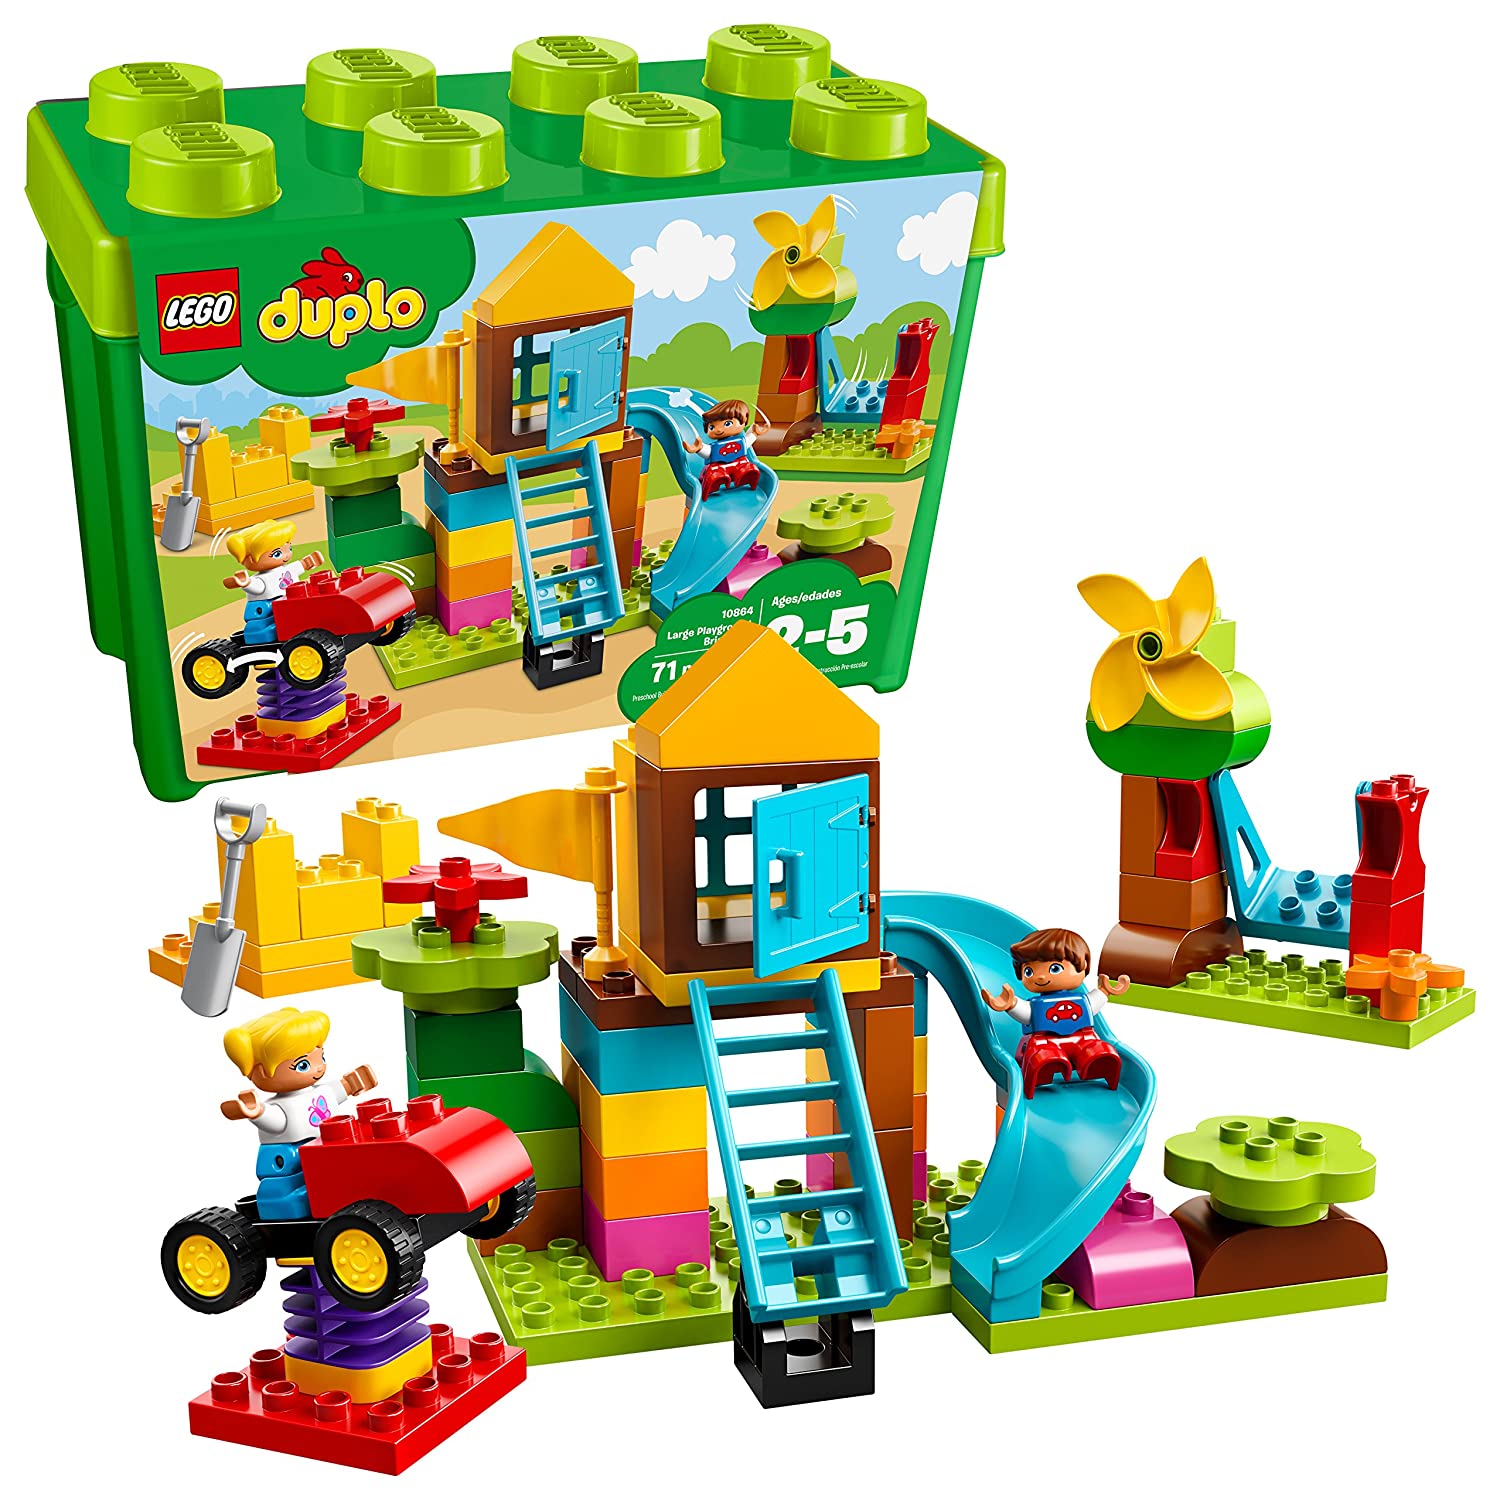 Top 9 Best Lego Duplo Sets Reviews in 2023 2